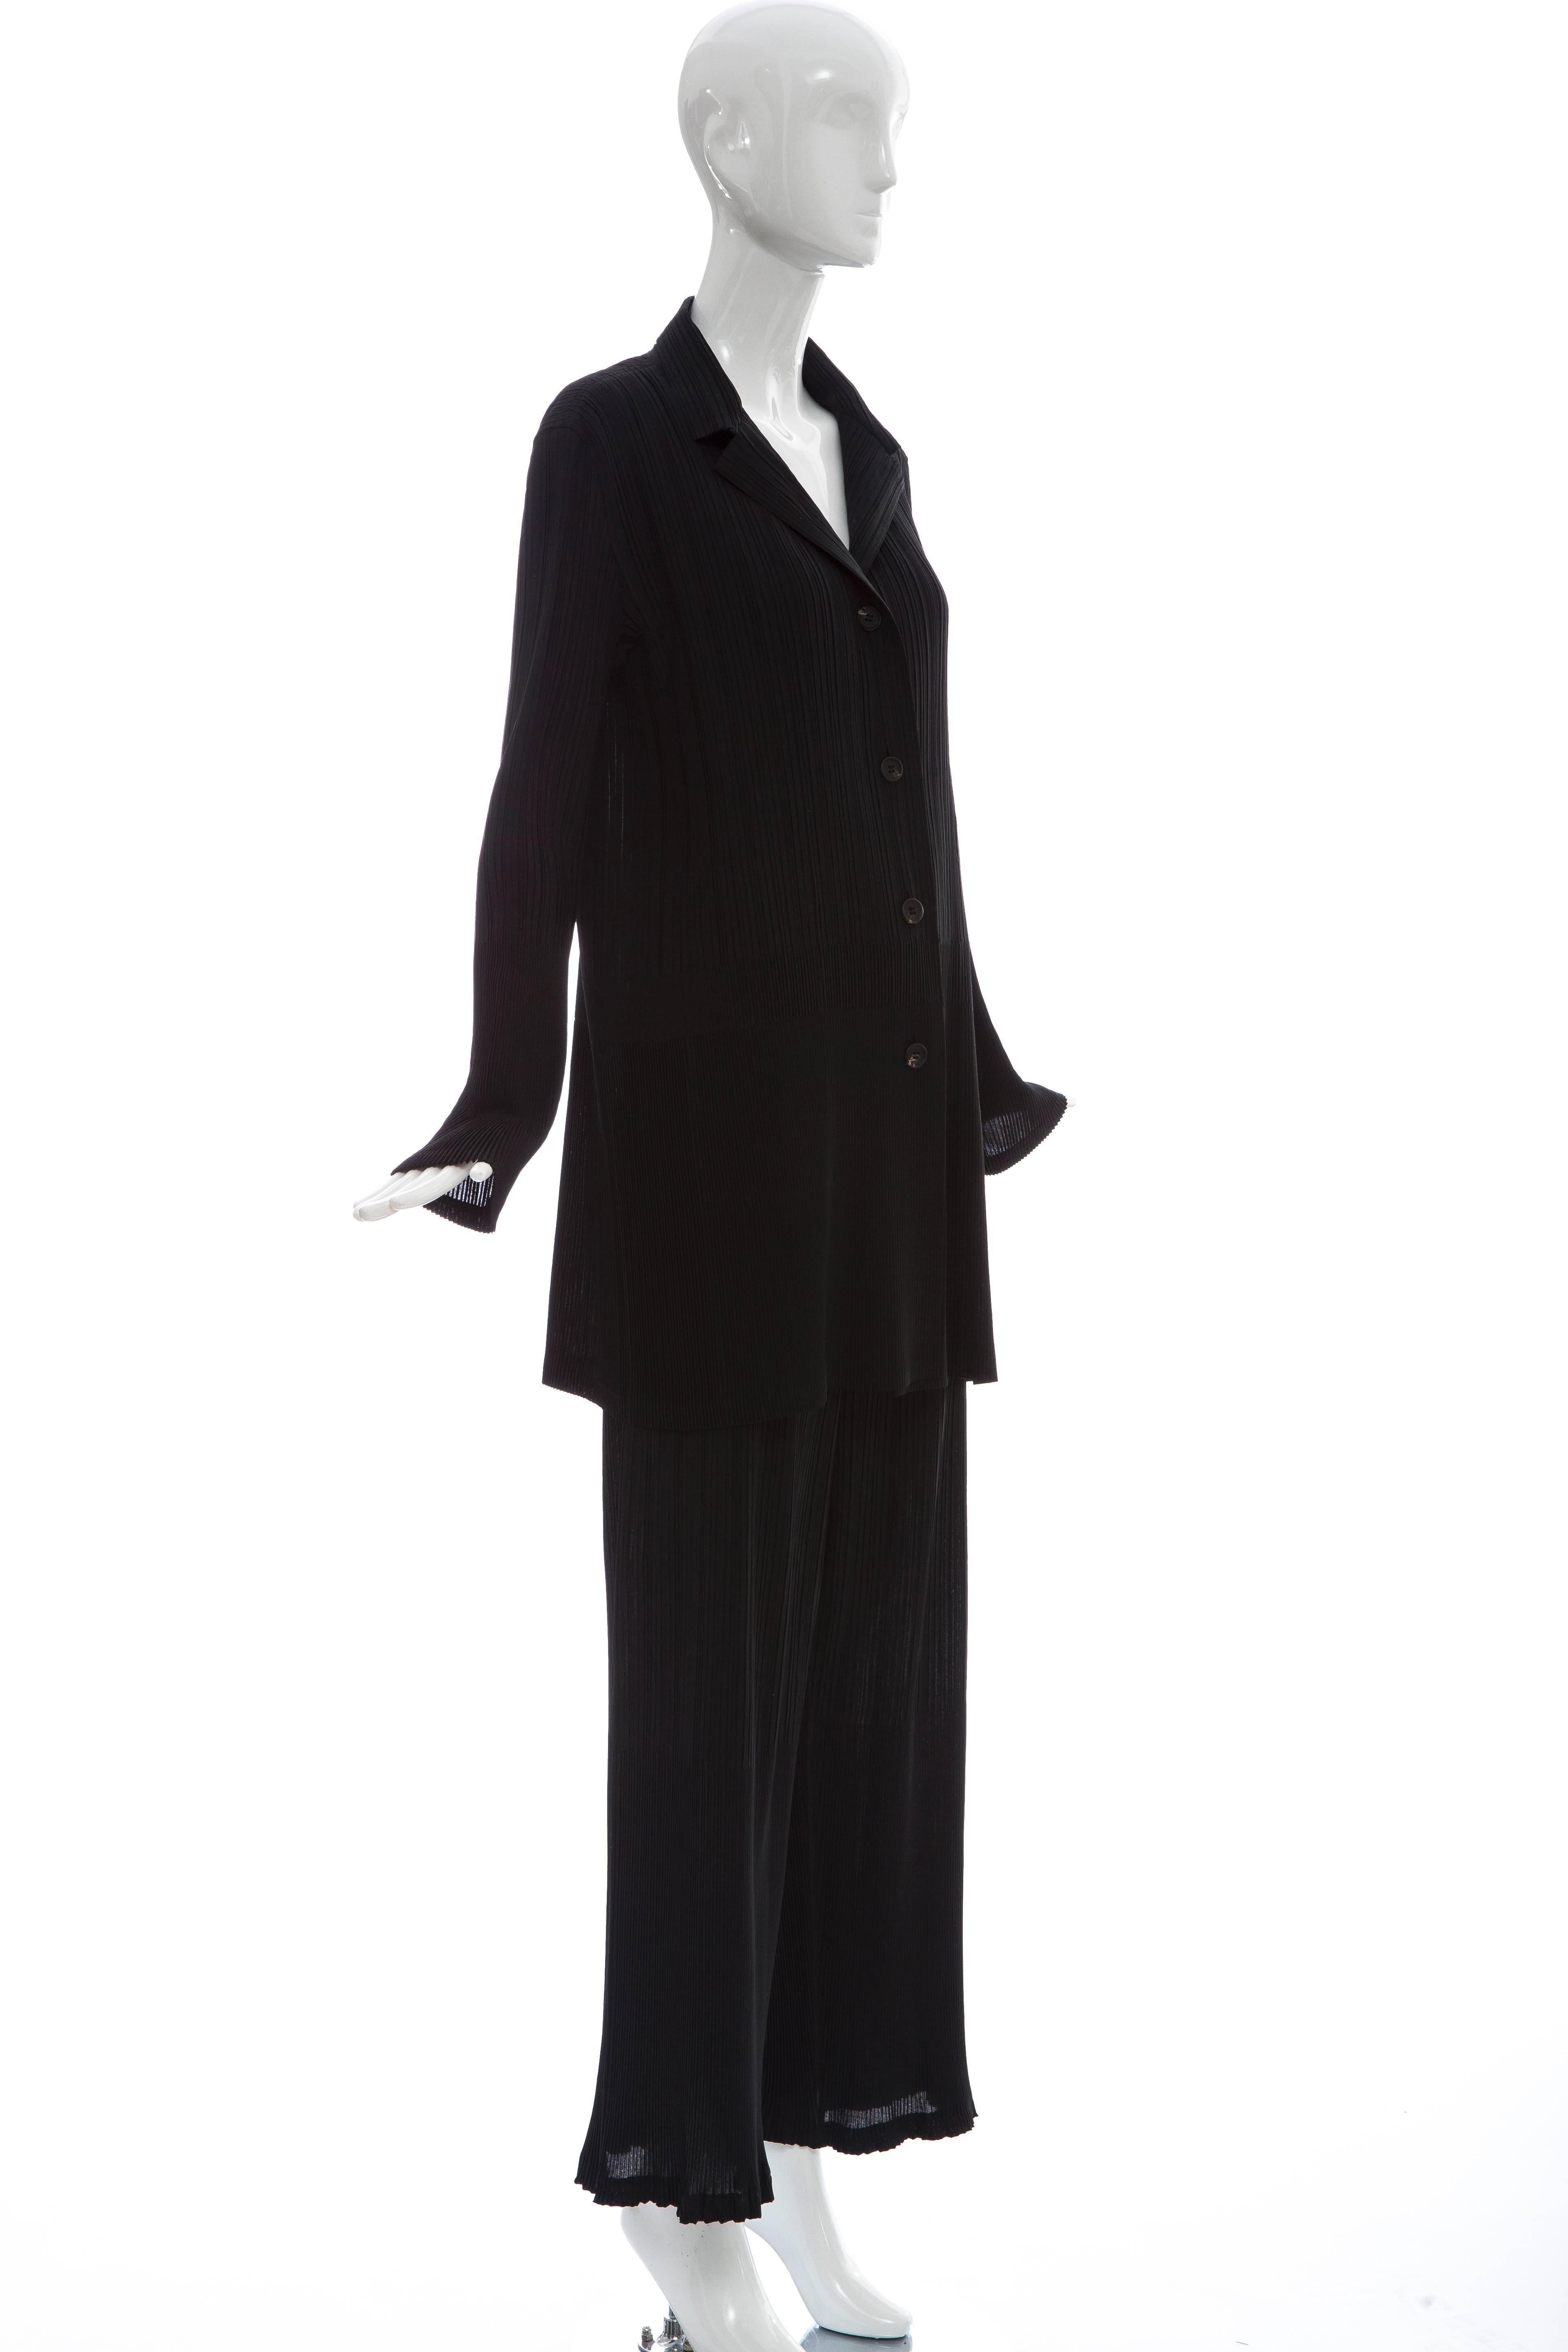 Issey Miyake Black Pleated Polyester Button Front Pant Suit, Circa 1990's In Excellent Condition For Sale In Cincinnati, OH